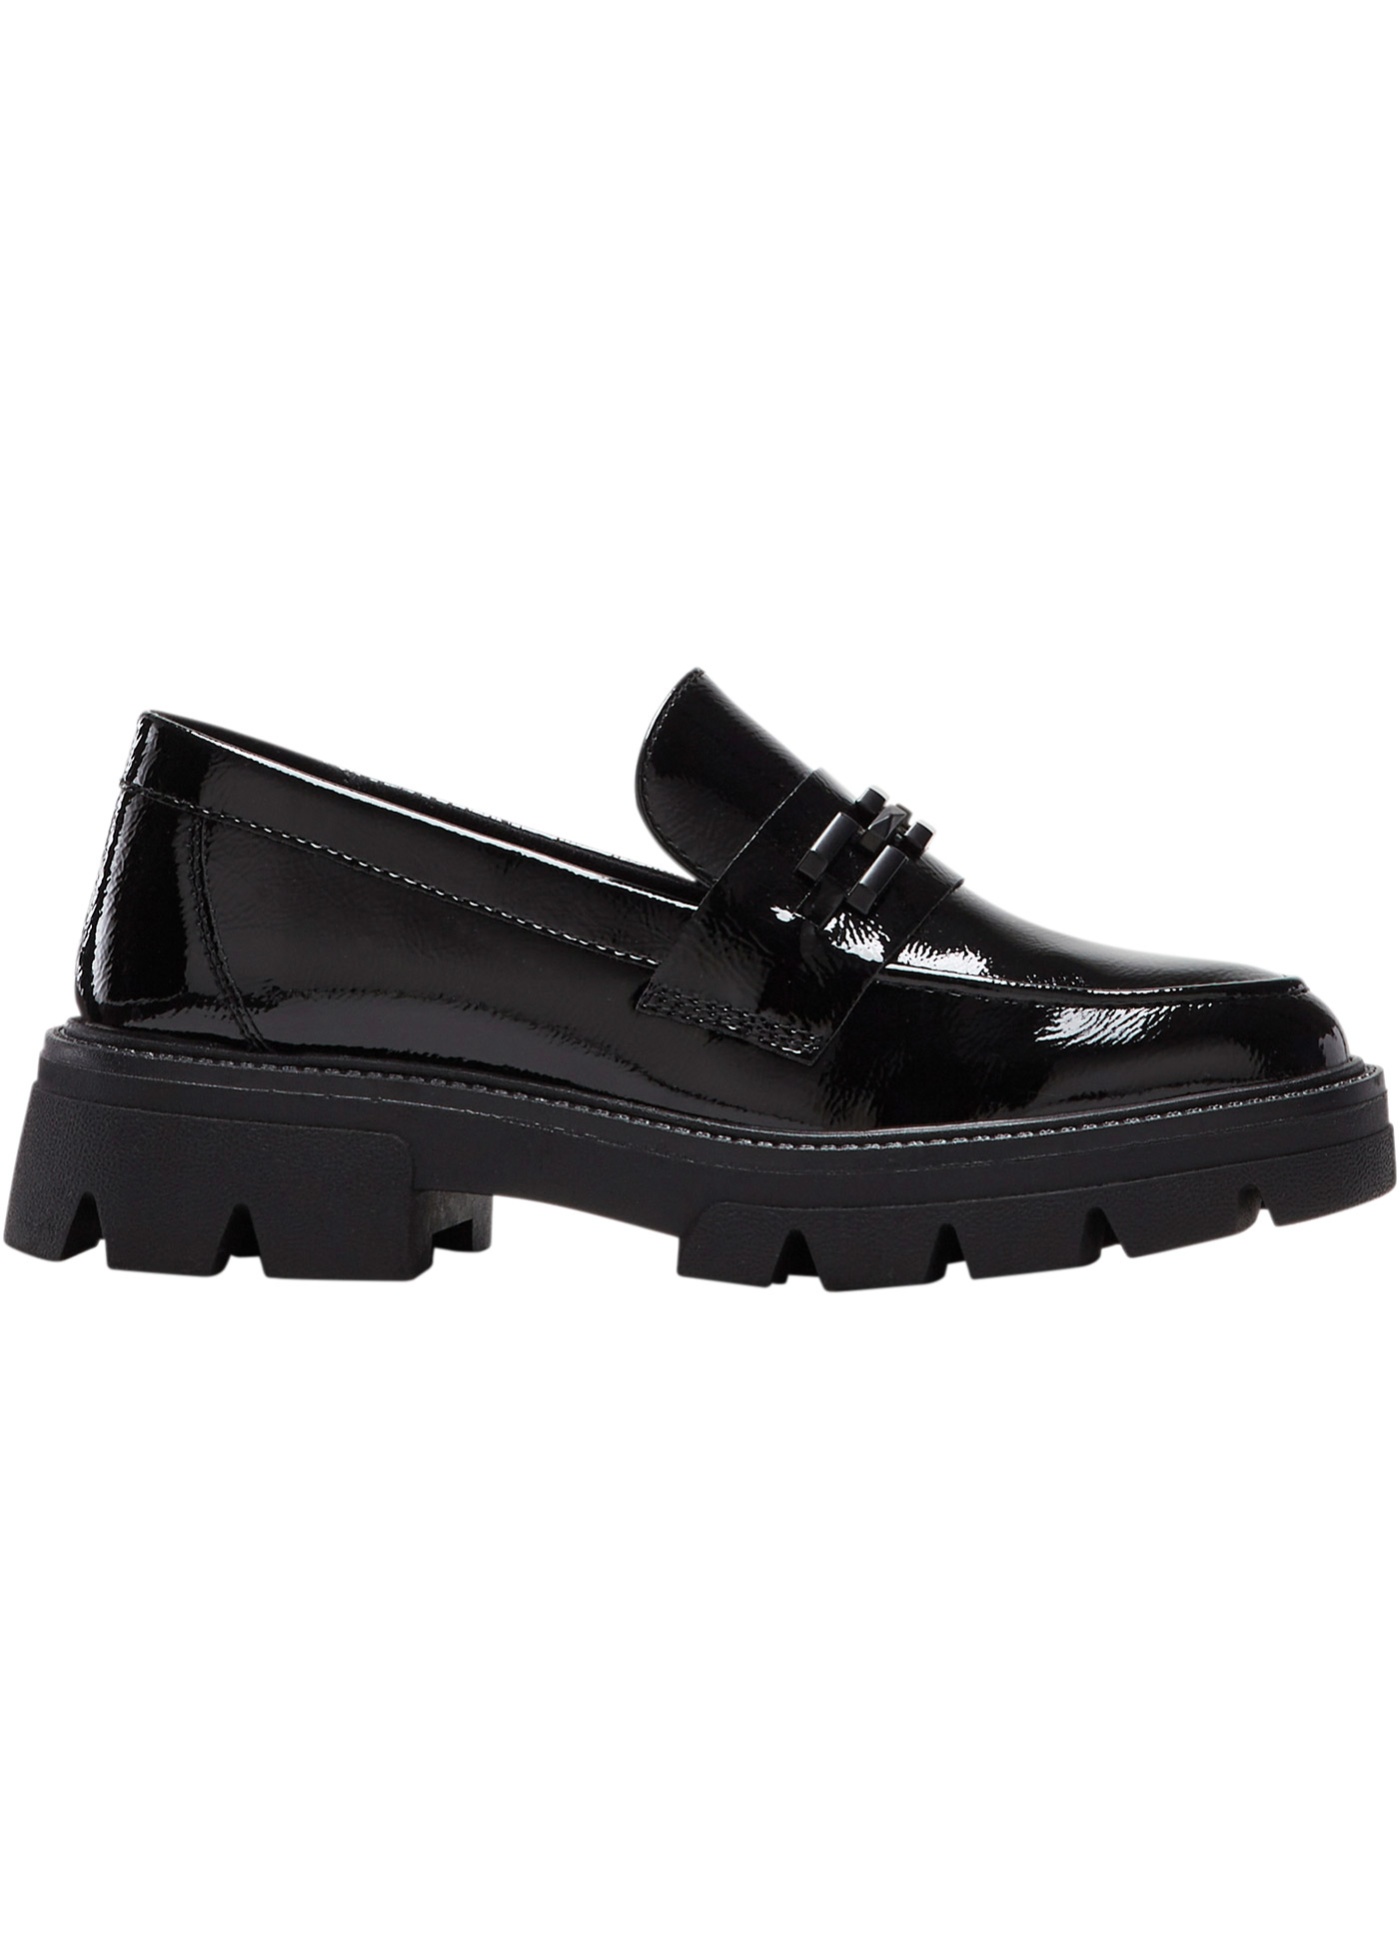 loafers s.oliver